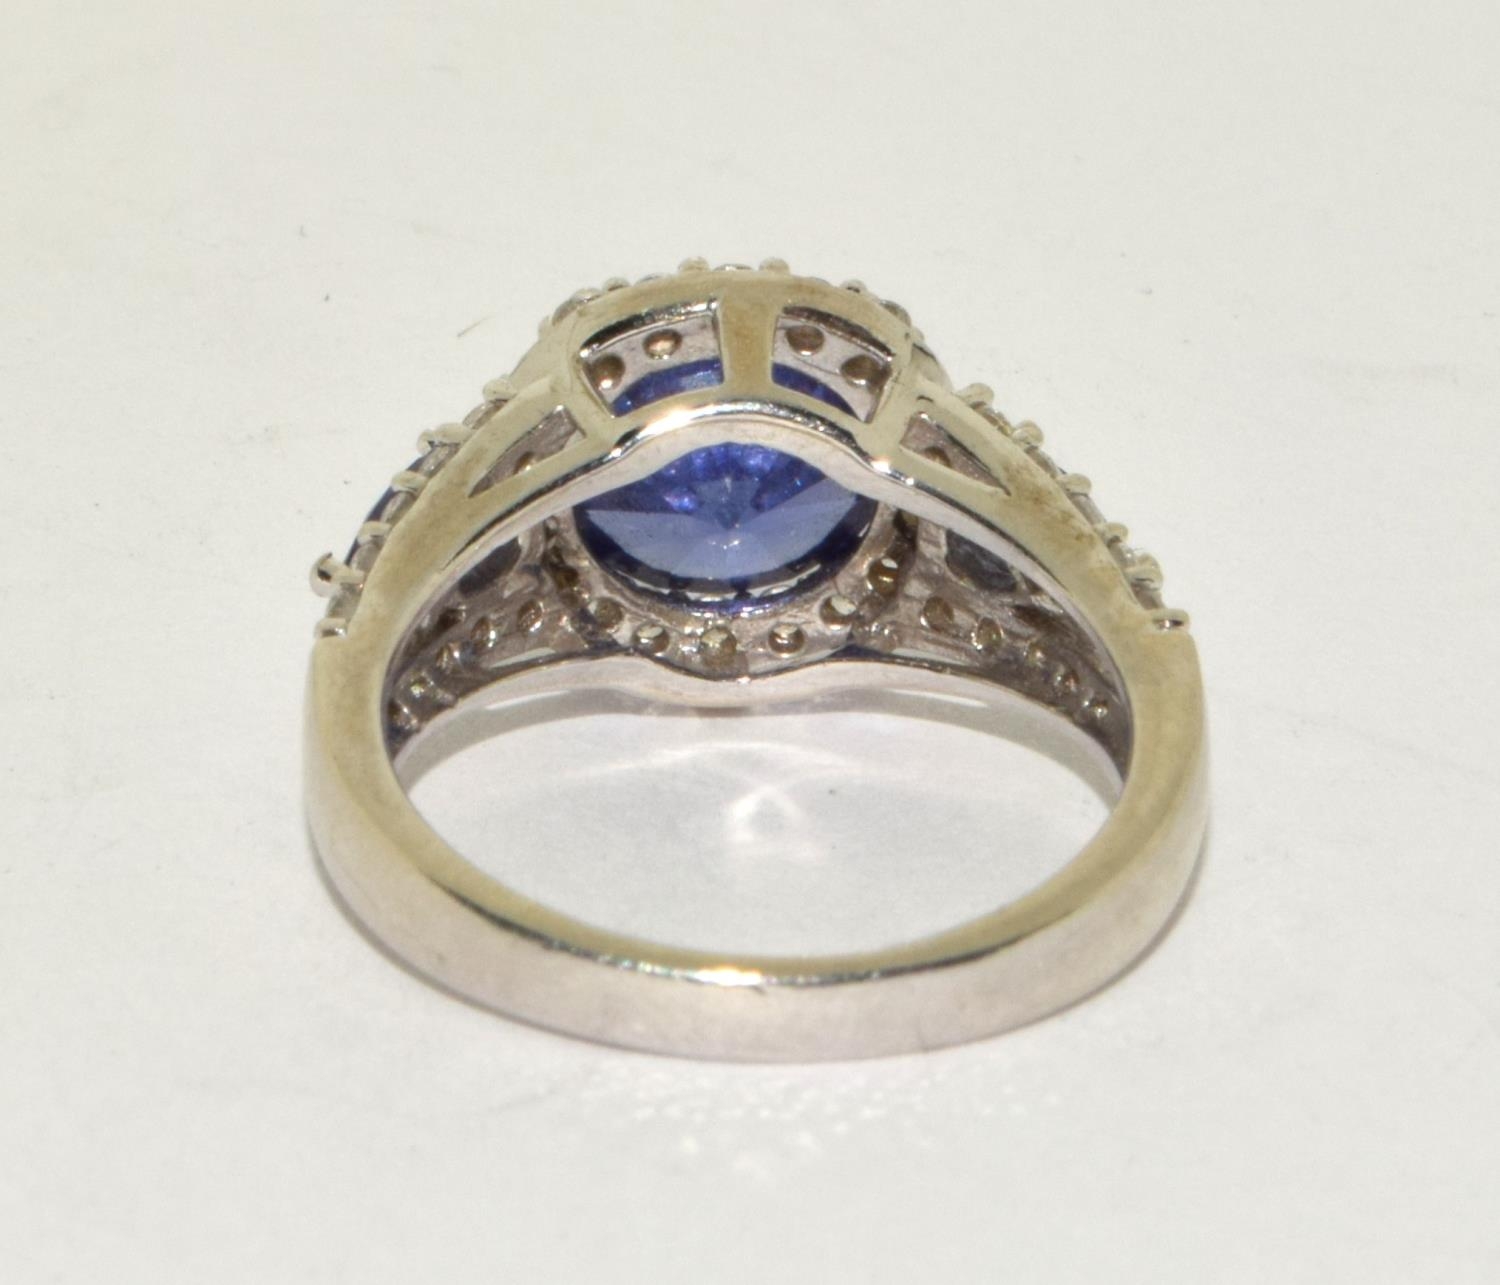 A stunning w/g on 925 silver DQCZ and tanzanite ring Size N - Image 3 of 3